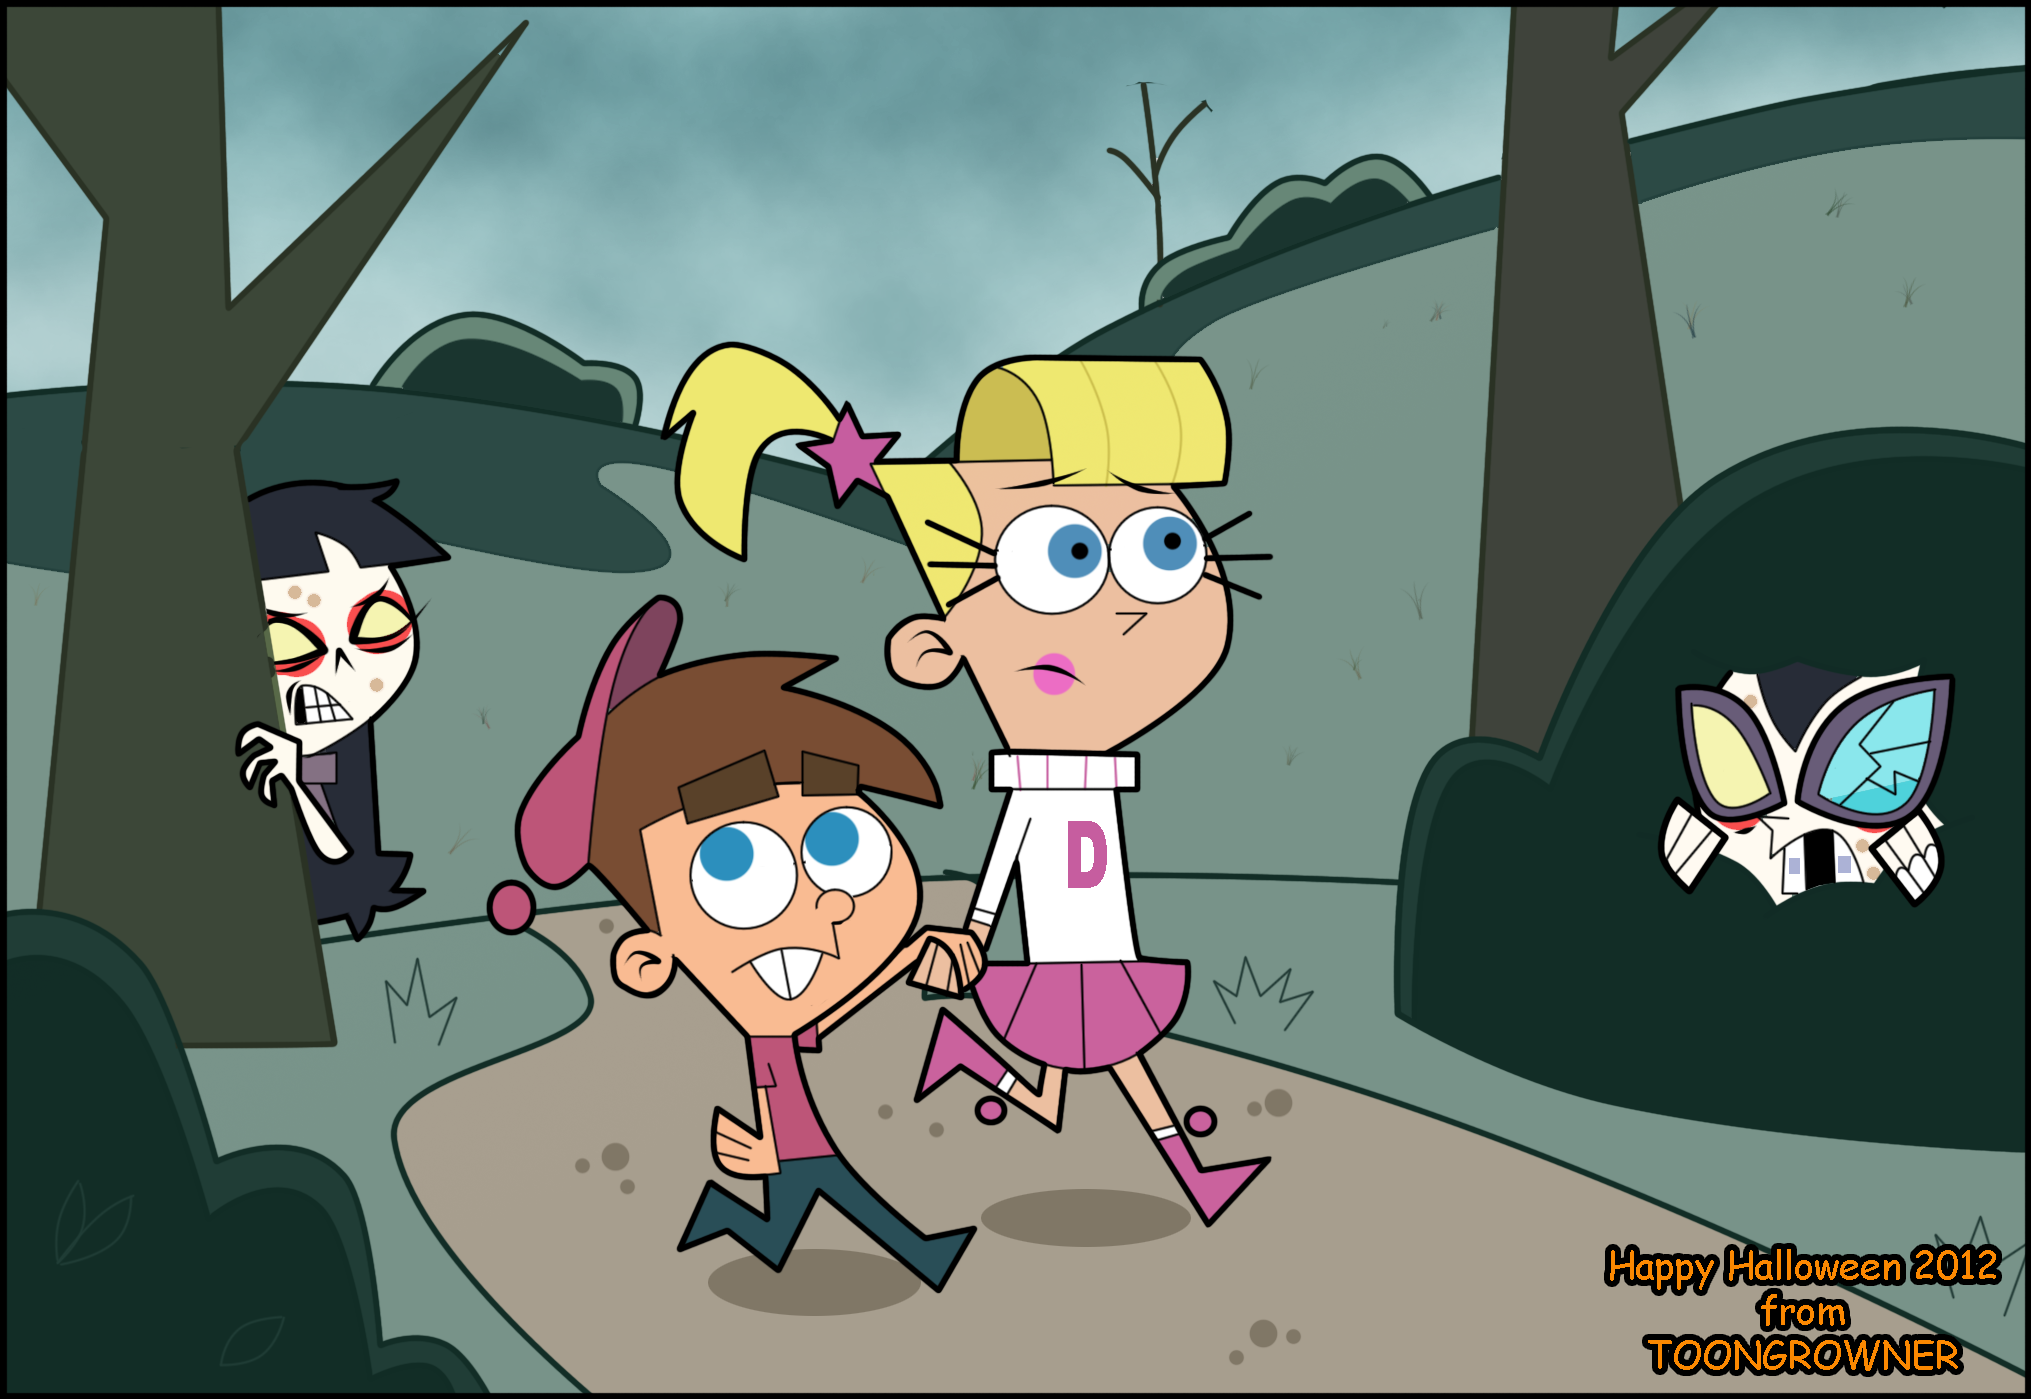 timmy_x_veronica zombified_by_toongrowner-d5jkr1a.png.